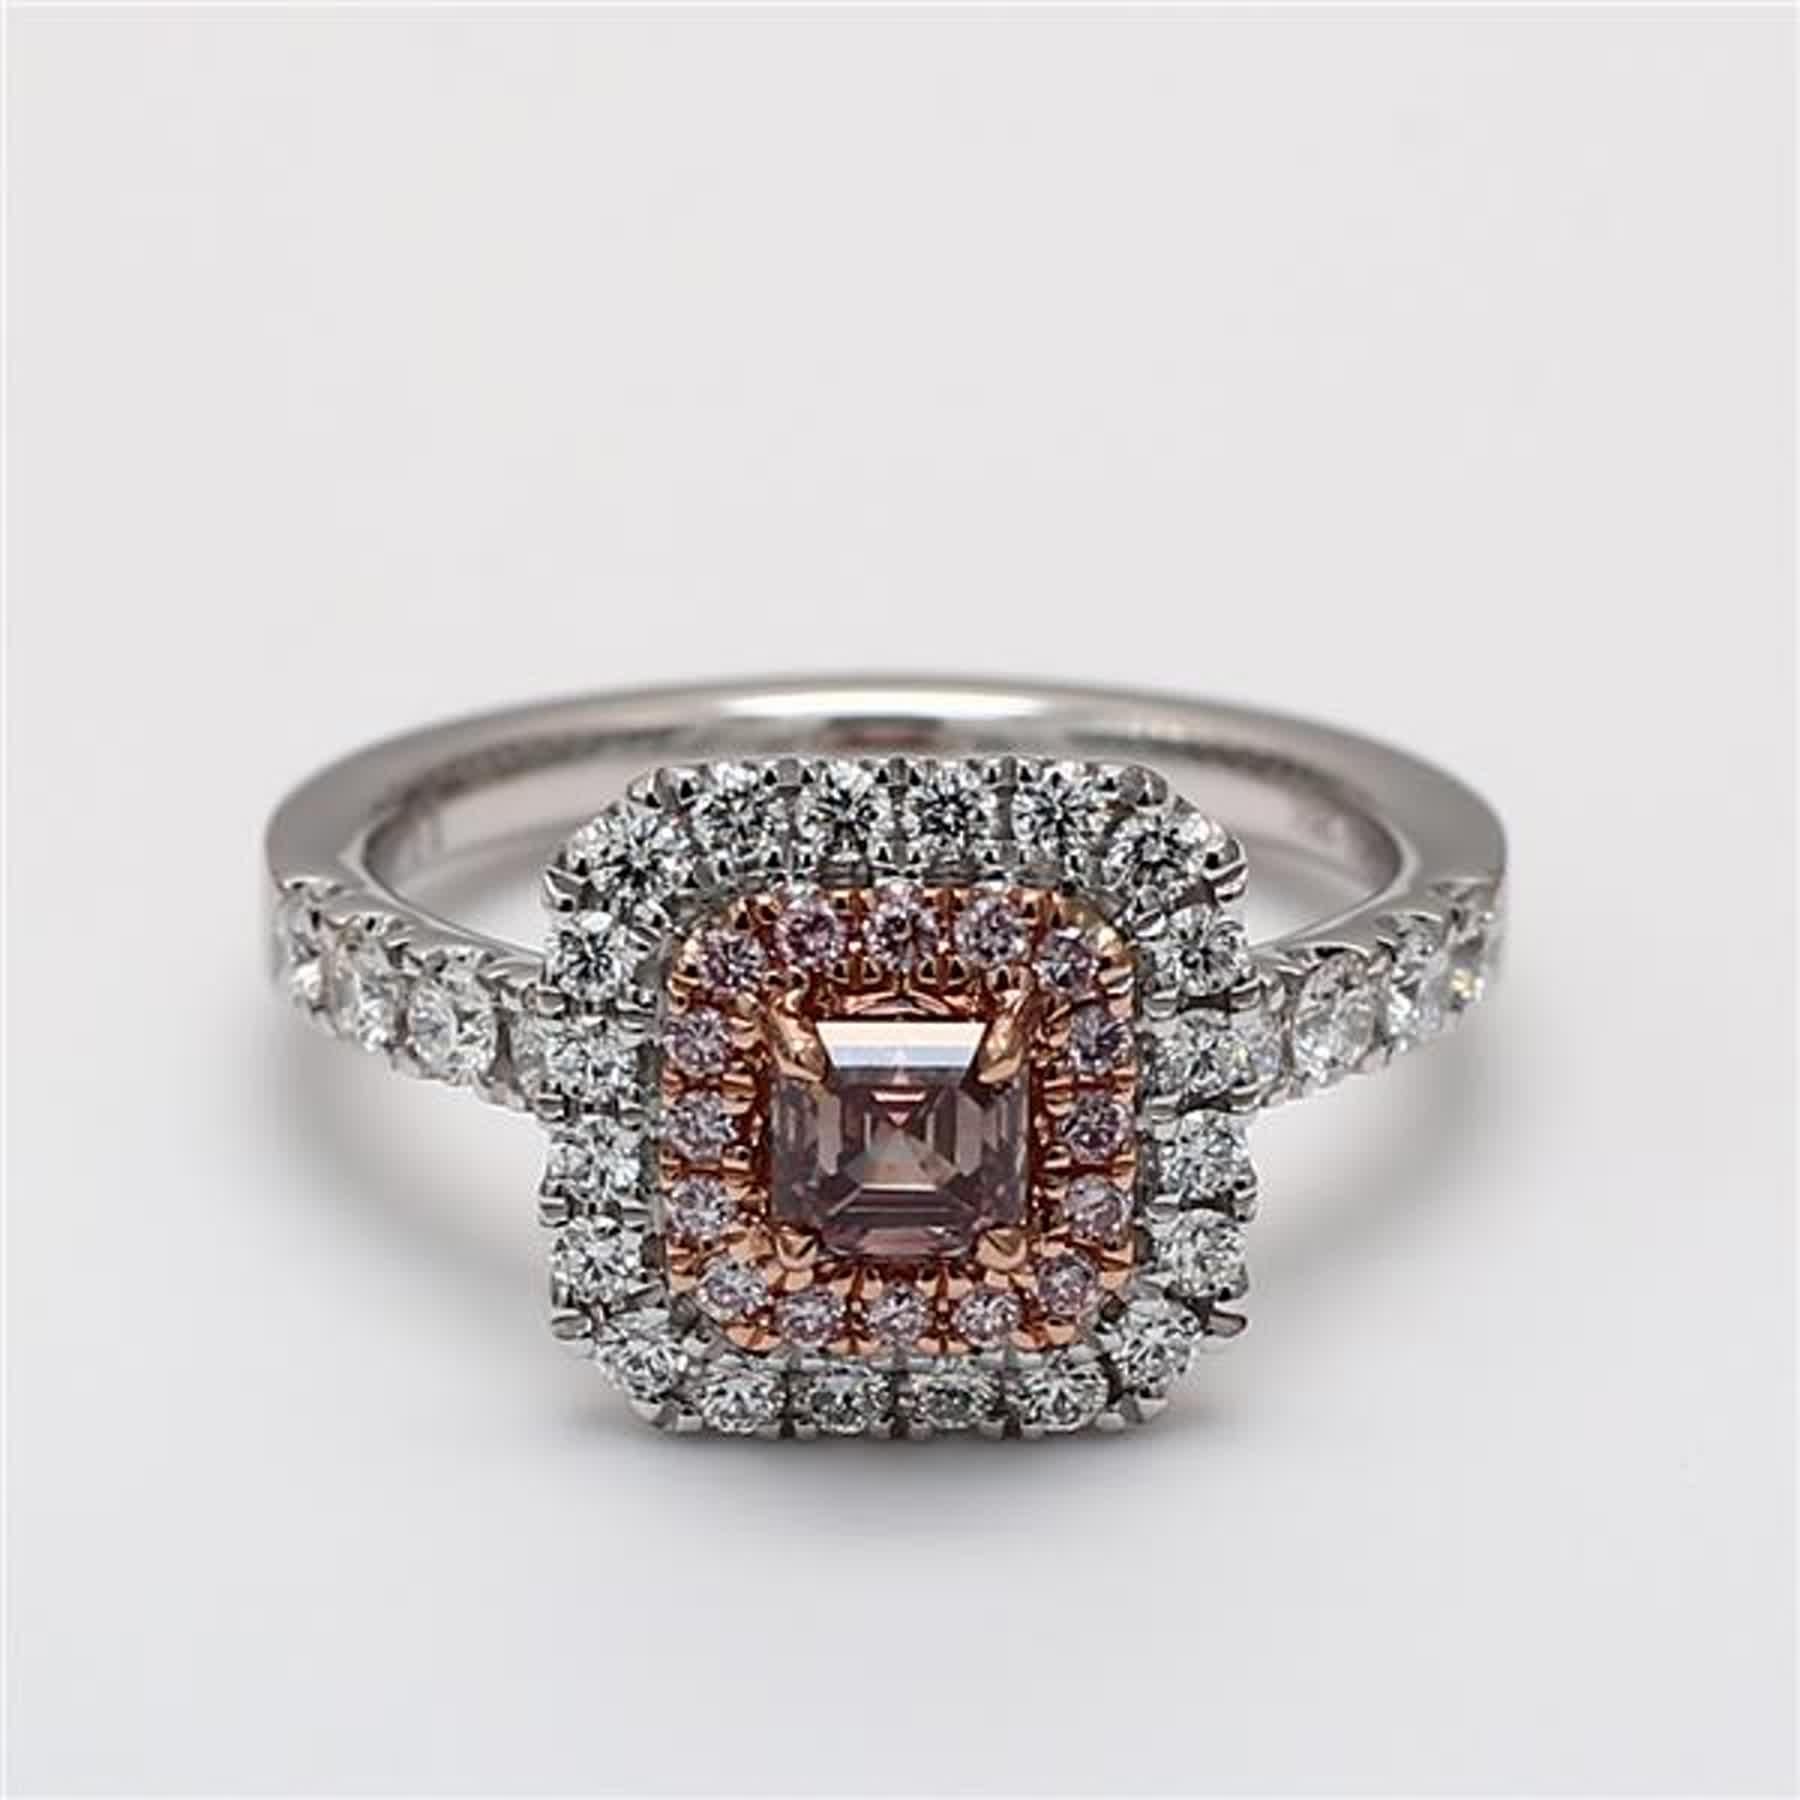 RareGemWorld's classic GIA certified diamond ring. Mounted in a beautiful 18K Rose and White Gold and Platinum setting with a natural asscher cut pink diamond. The pink diamond is surrounded by round natural pink diamond melee and round natural